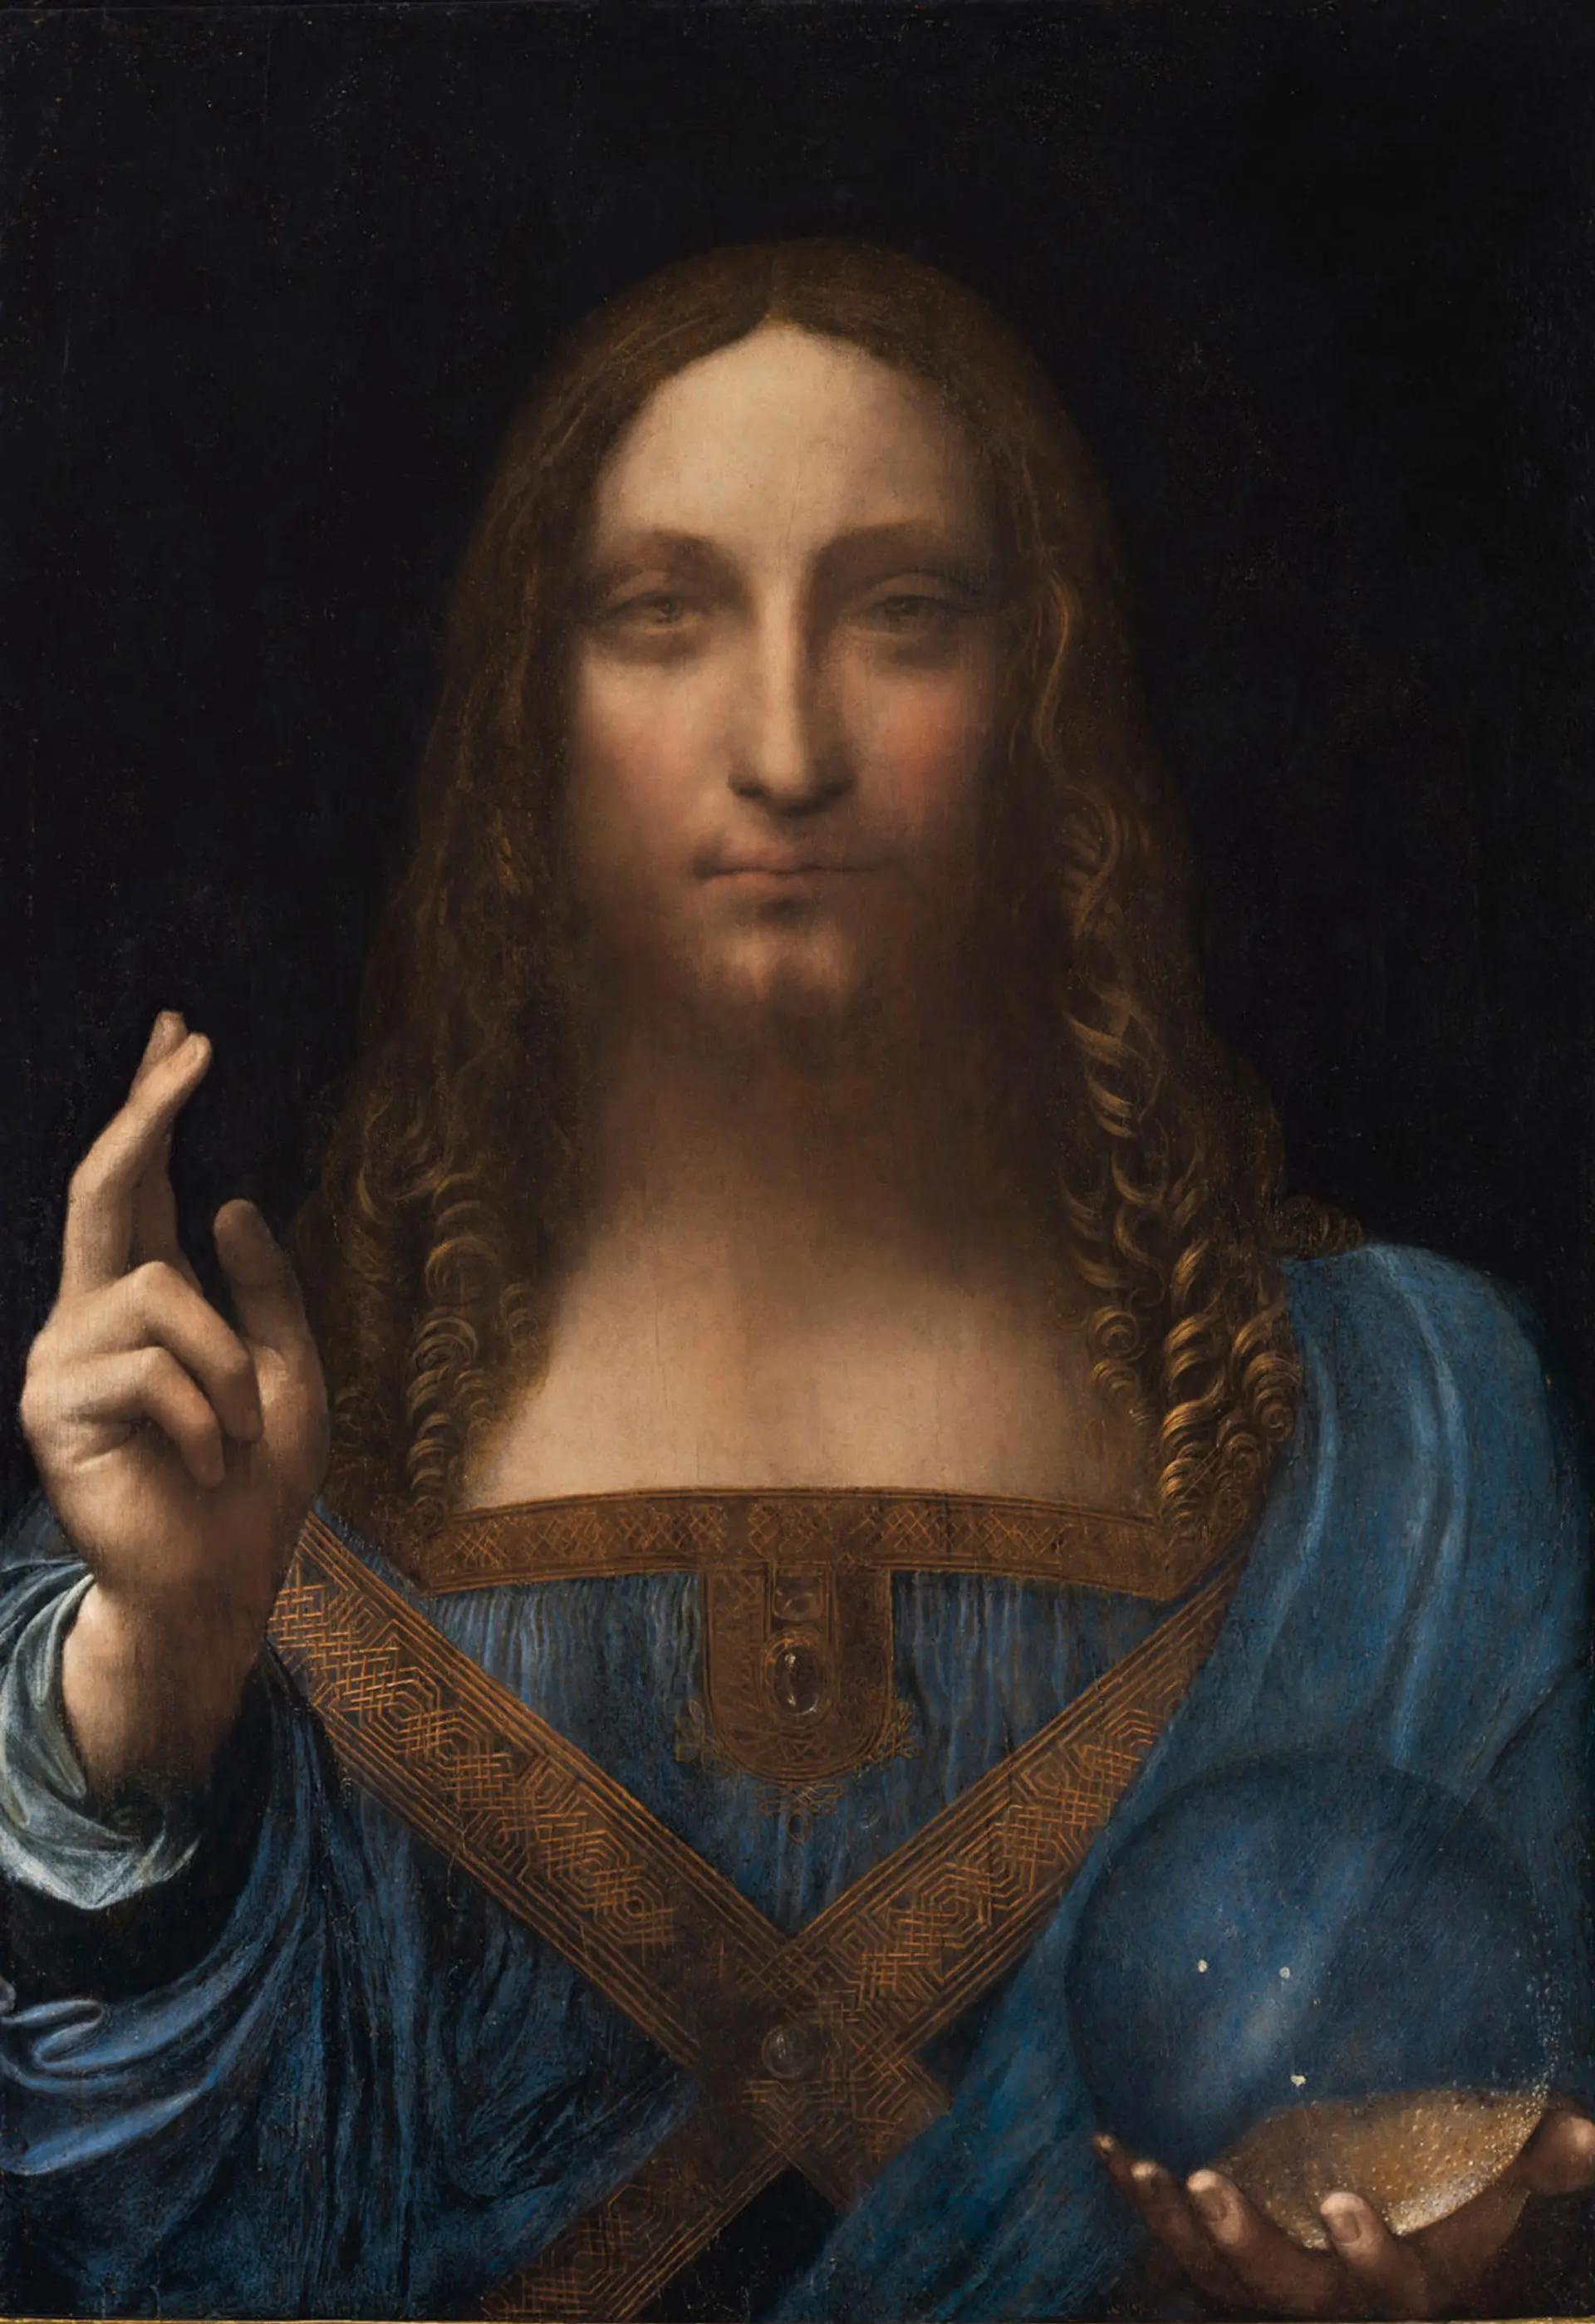 The Salvator Mundi, attributed to Leonardo da Vinci, is one of four works sold privately by Sotheby's that are subject to the fraud-related claim  